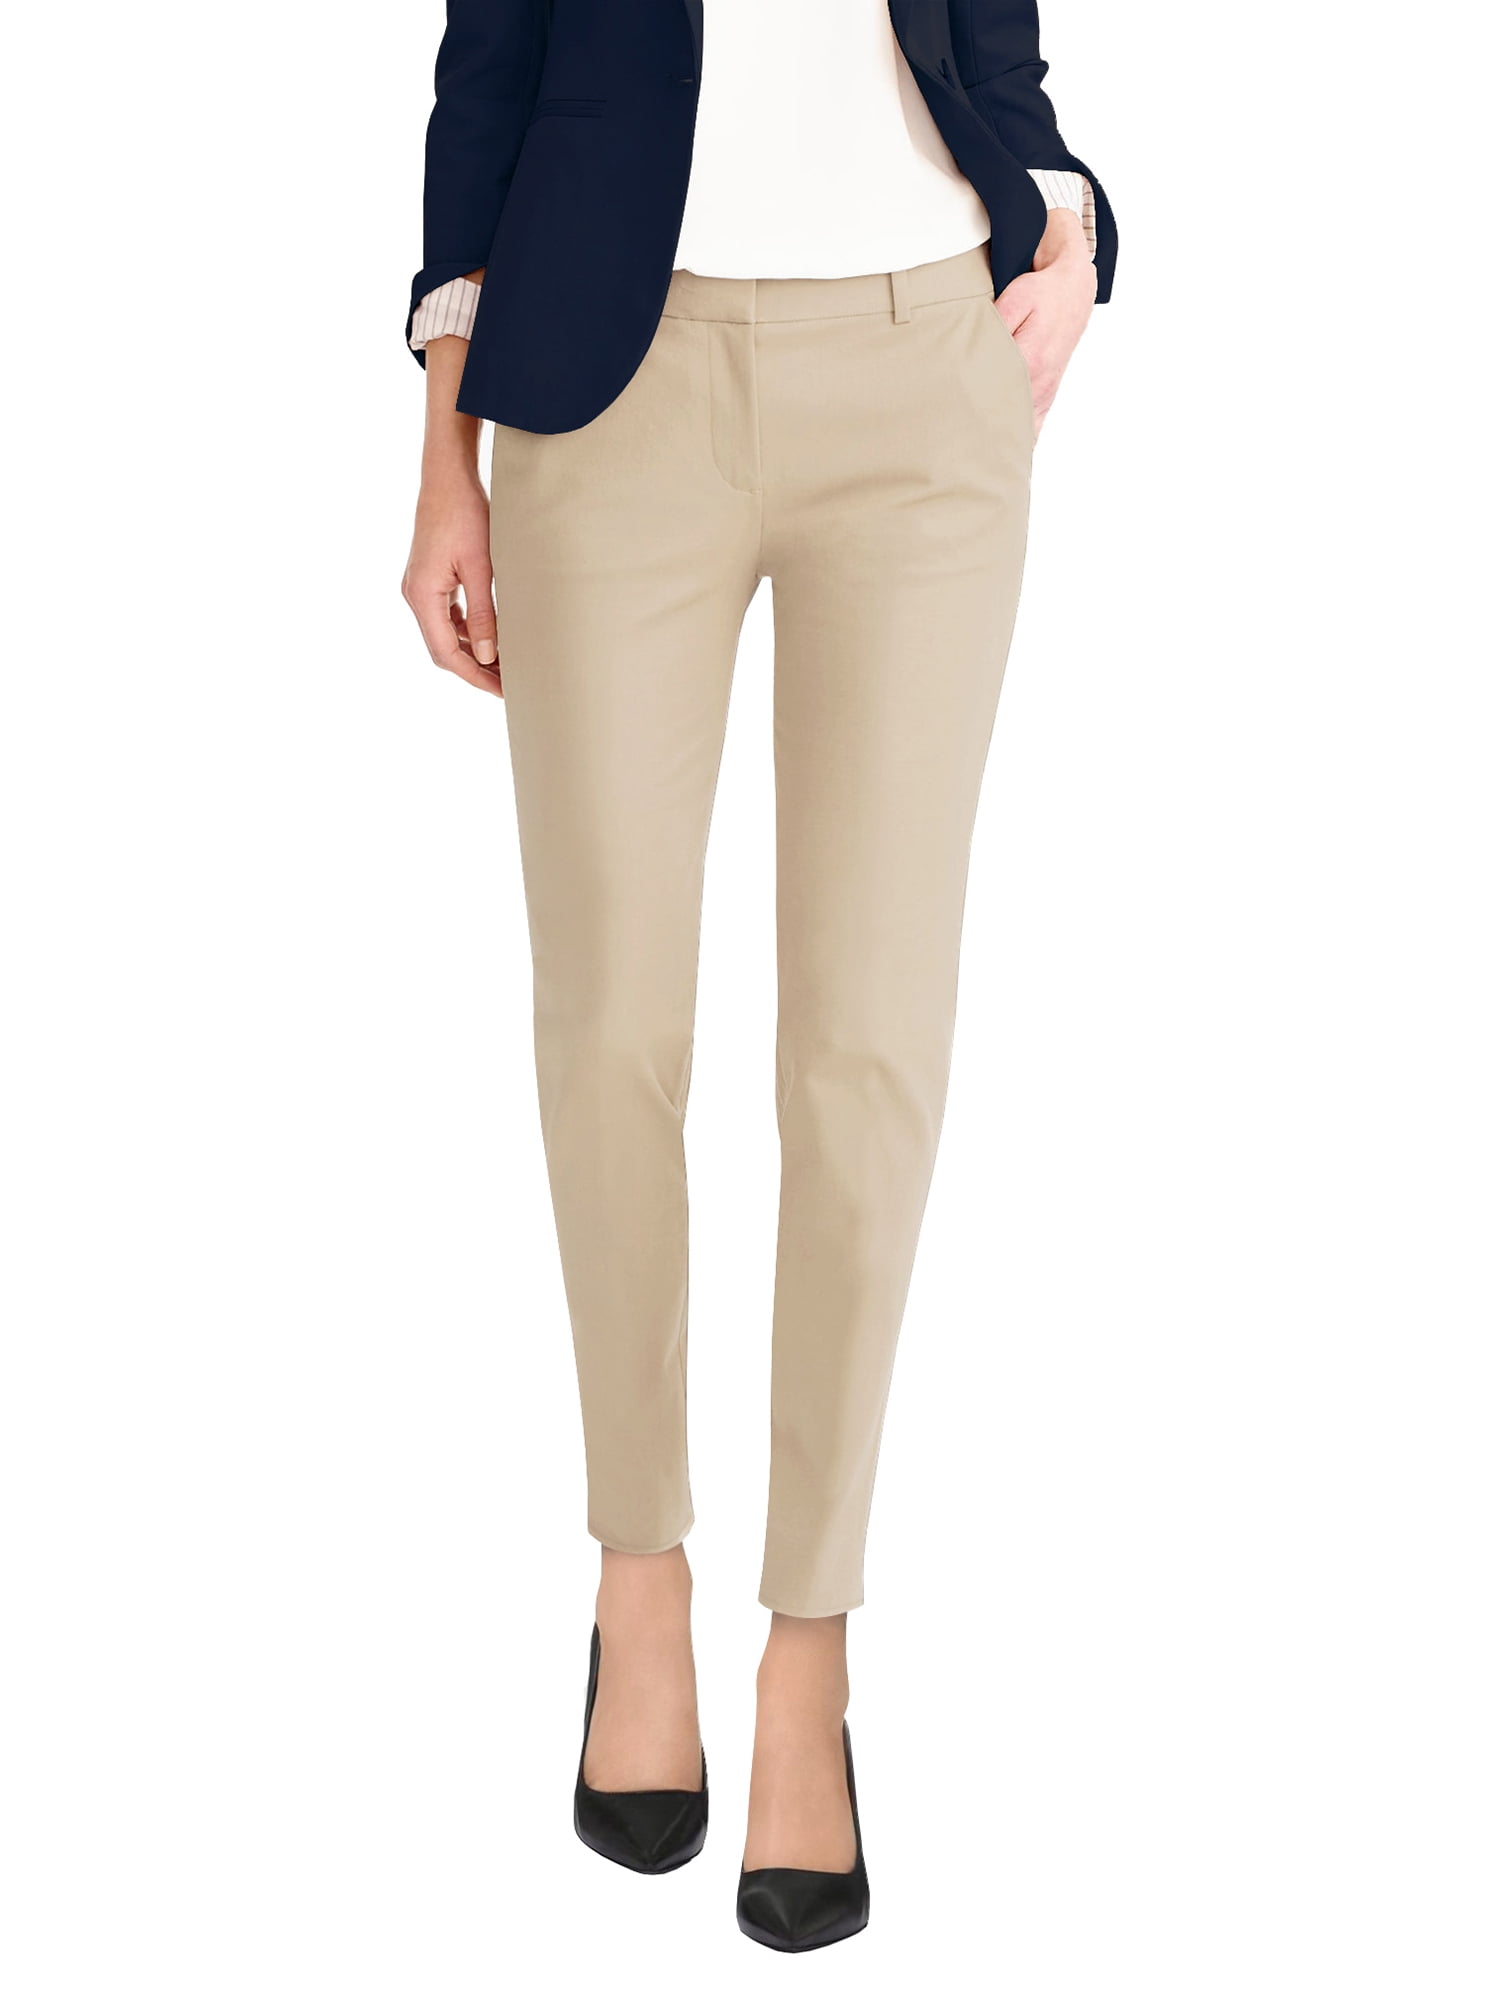 Hybrid & Company Womens Super Comfy Flat Front Stretch Trousers